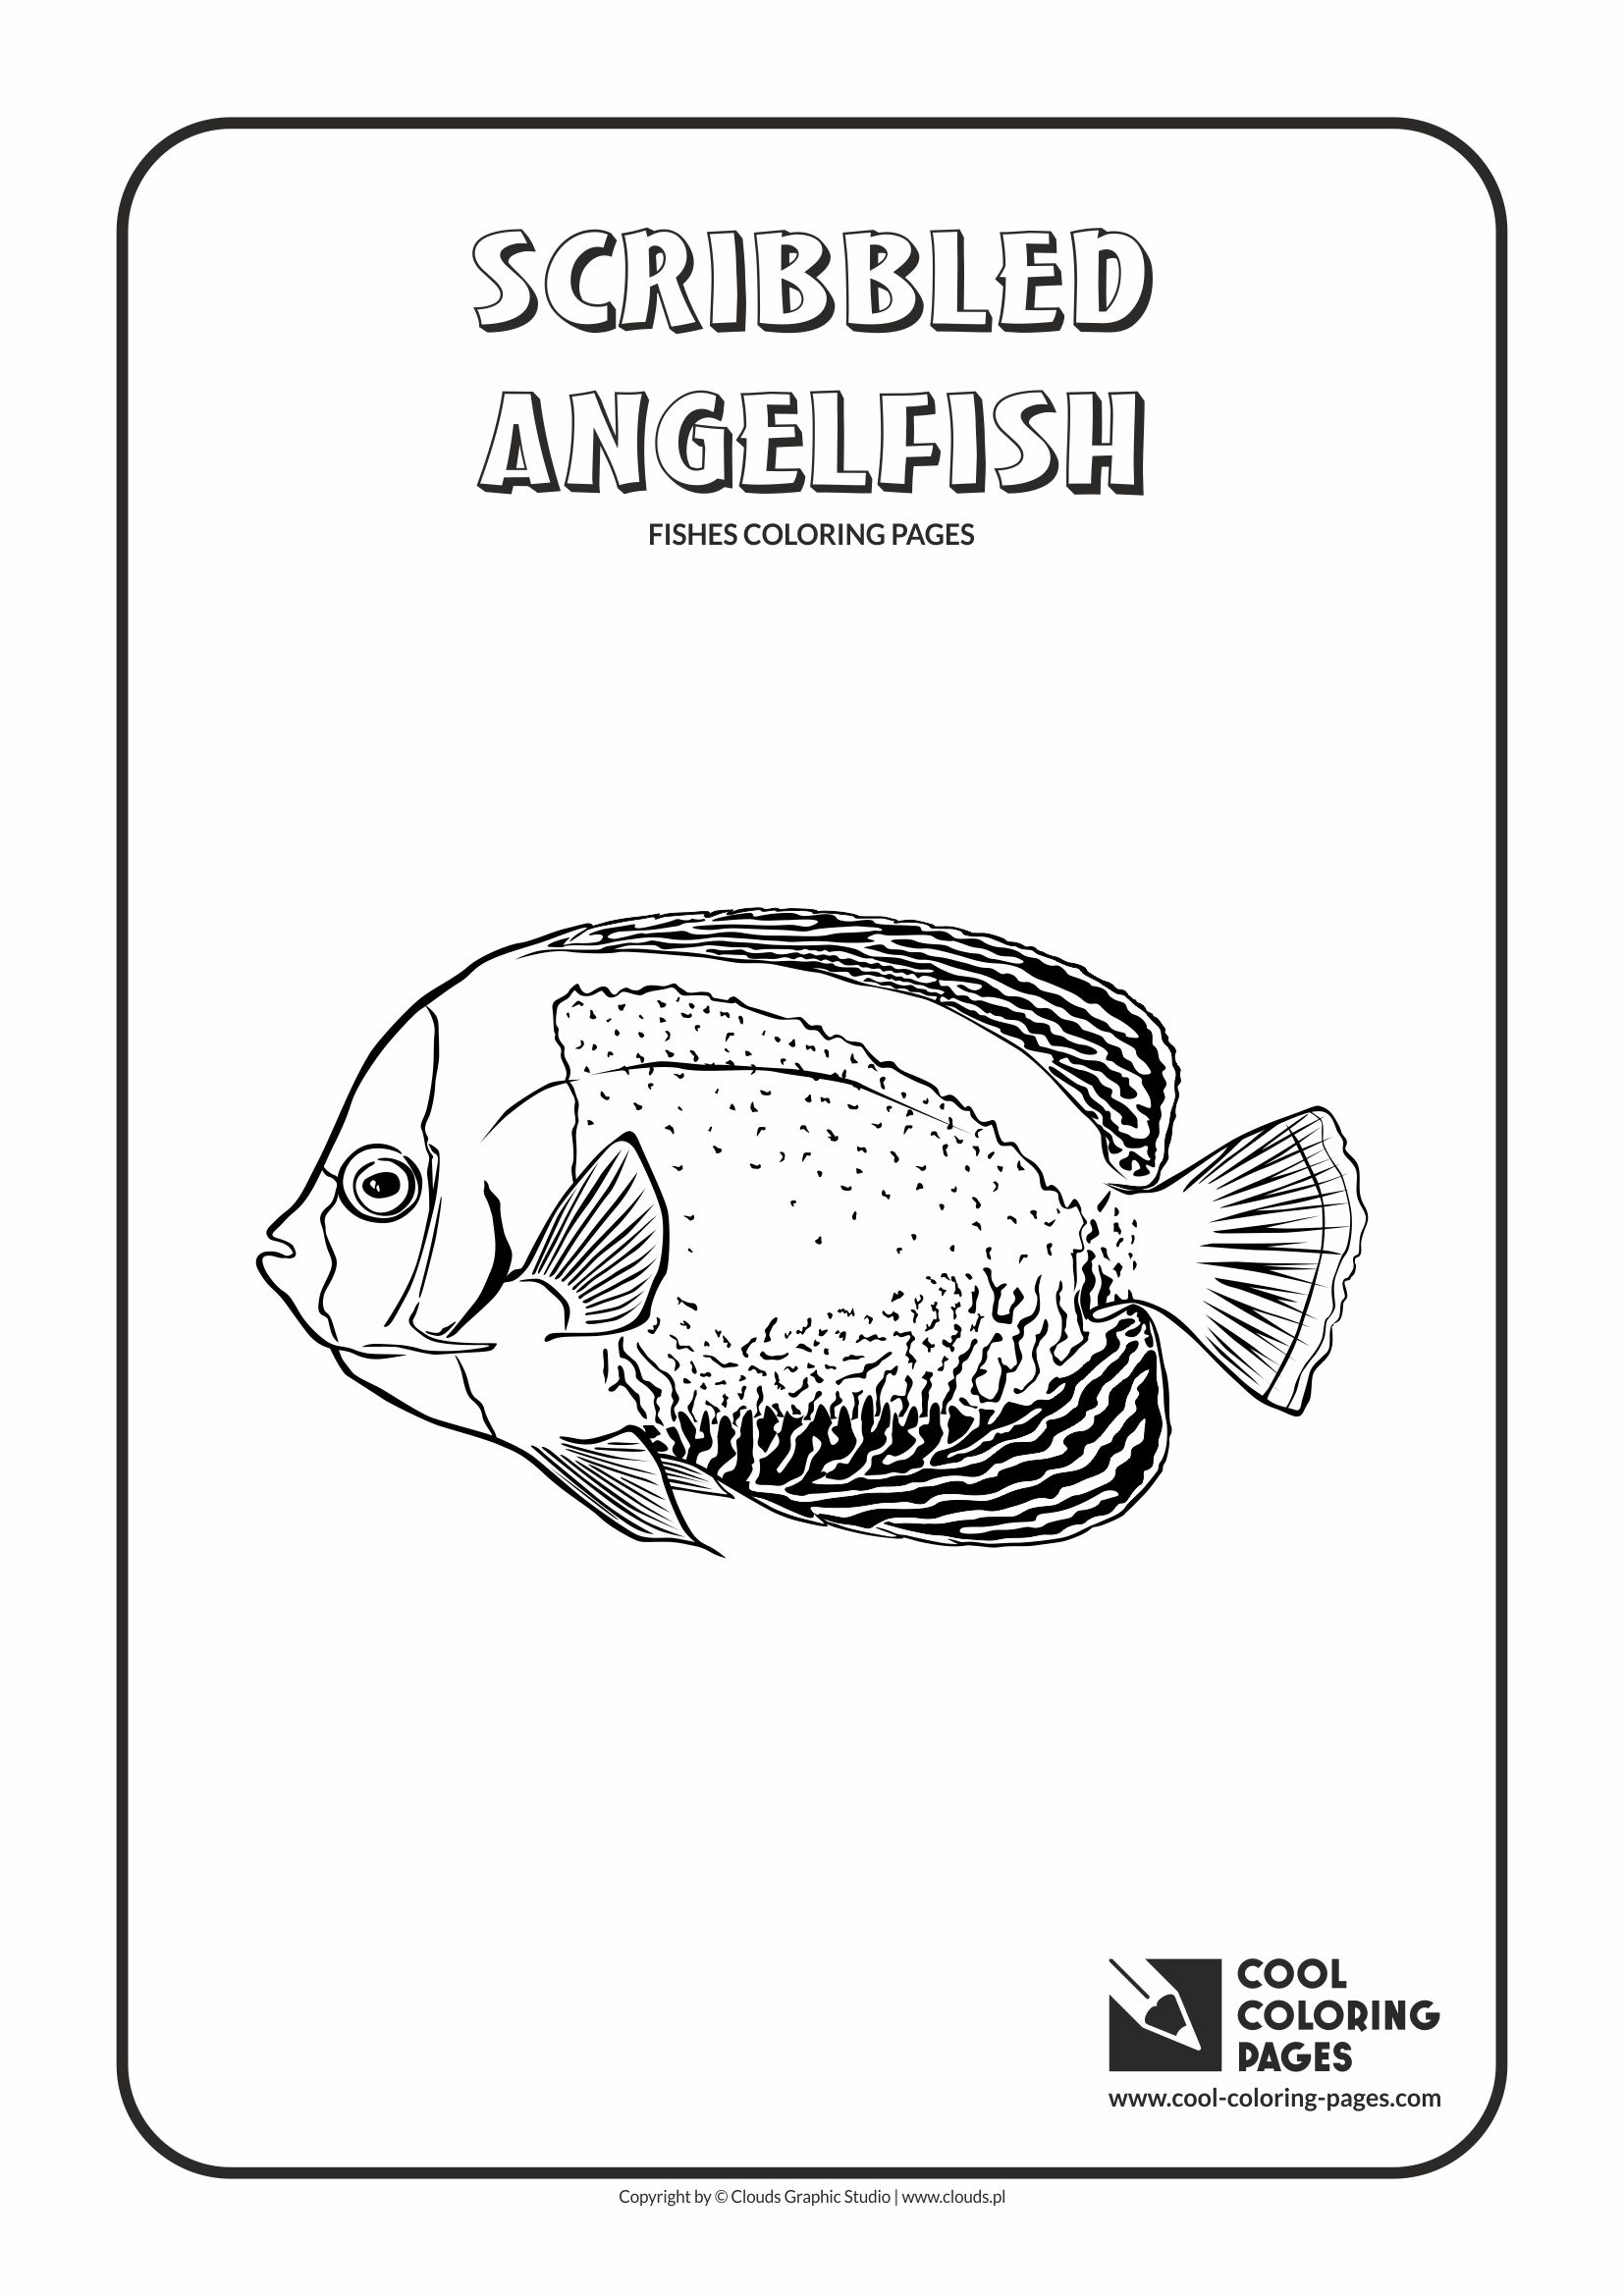 Cool Coloring Pages - Animals / Scribbled angelfish / Coloring page with scribbled angelfish